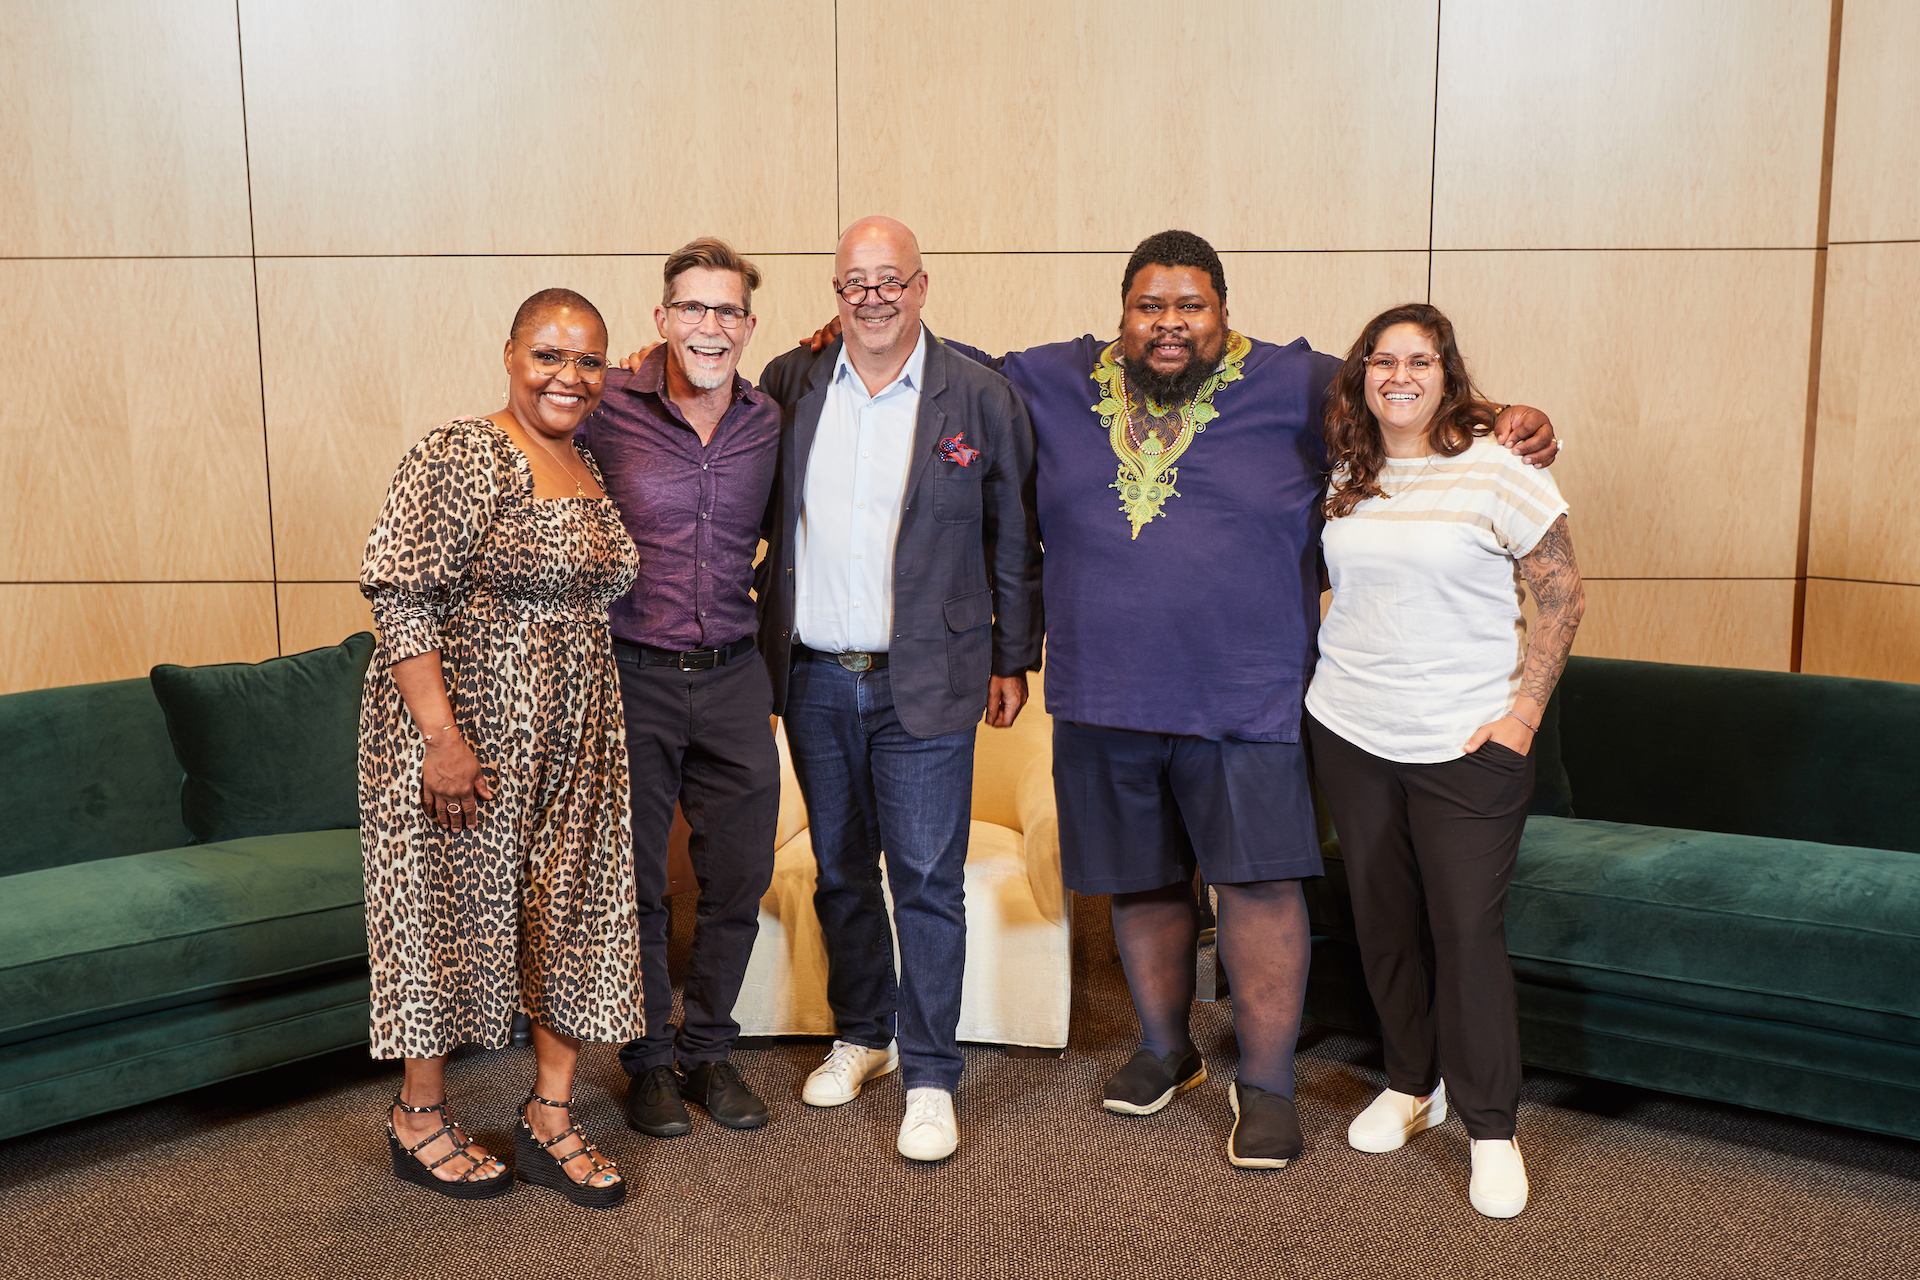 "Conversations at Copia" panelists (left to right) Tanya Holland, Rick Bayless, Michael Twitty, and Emiliana Puyana with host Andrew Zimmern (center).